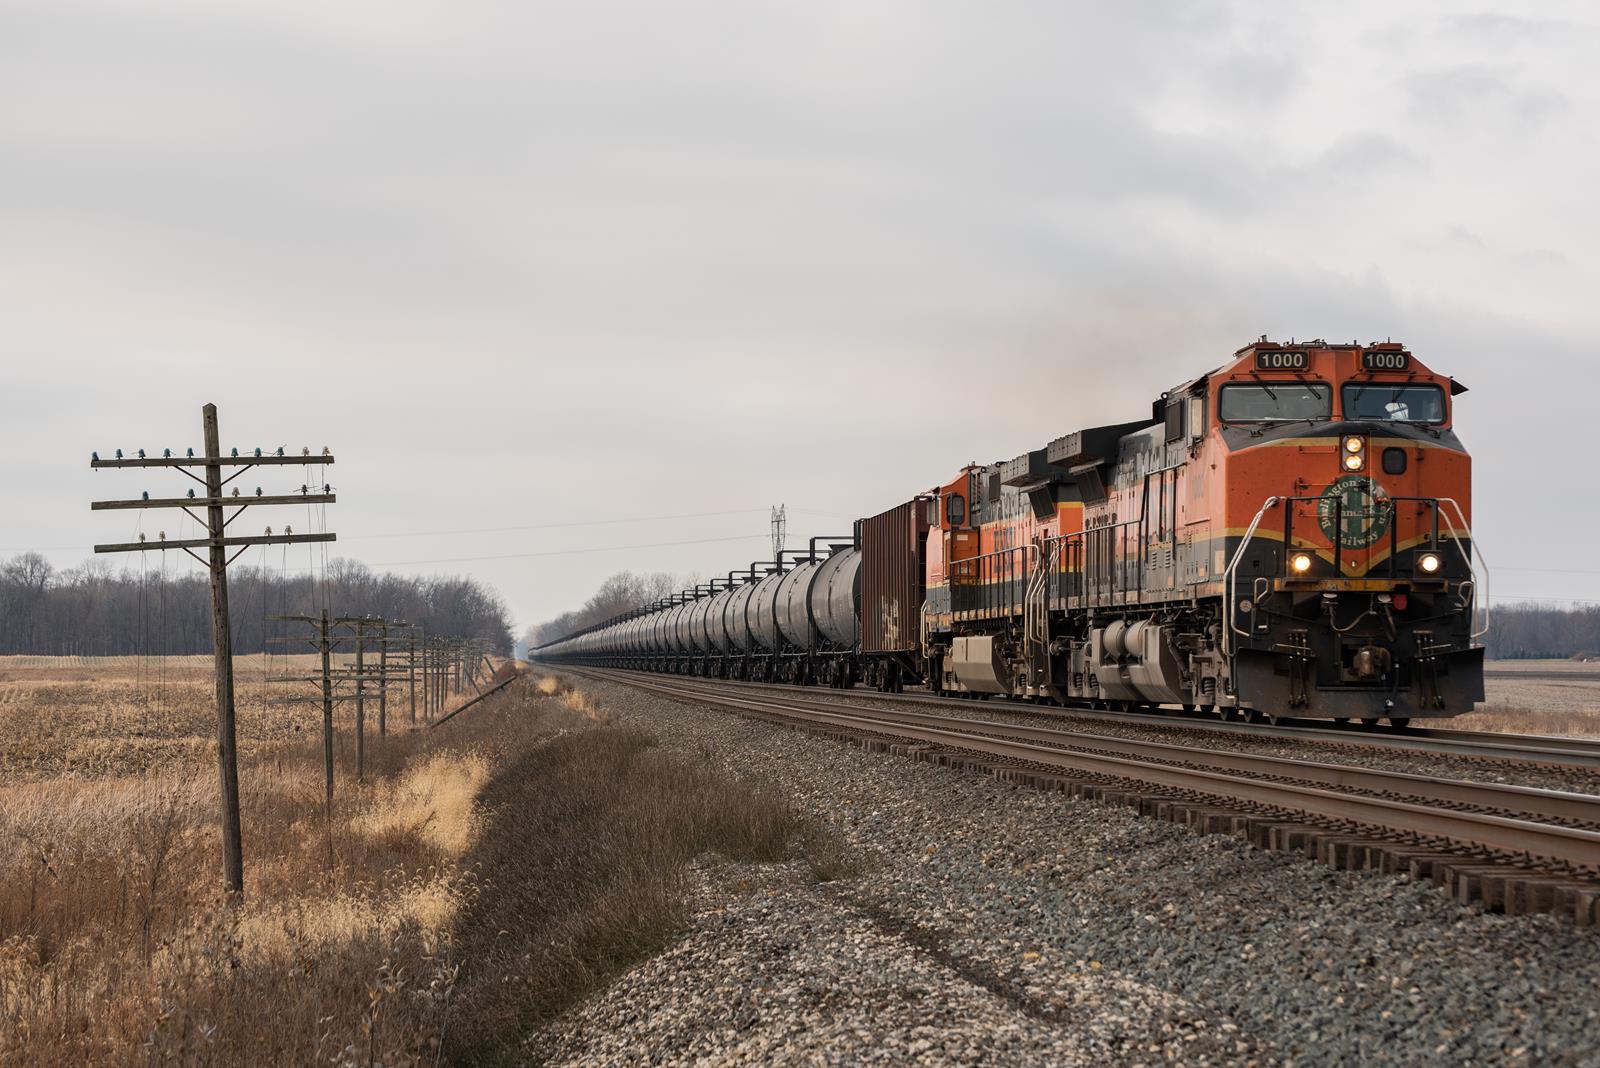 BNSF 1000 is a class GE C44-9W (Dash 9-44CW) and  is pictured in Wawaka, Indiana, USA.  This was taken along the Chicago Line on the Norfolk Southern Railway. Photo Copyright: Spencer Harman uploaded to Railroad Gallery on 12/13/2022. This photograph of BNSF 1000 was taken on Tuesday, December 13, 2022. All Rights Reserved. 